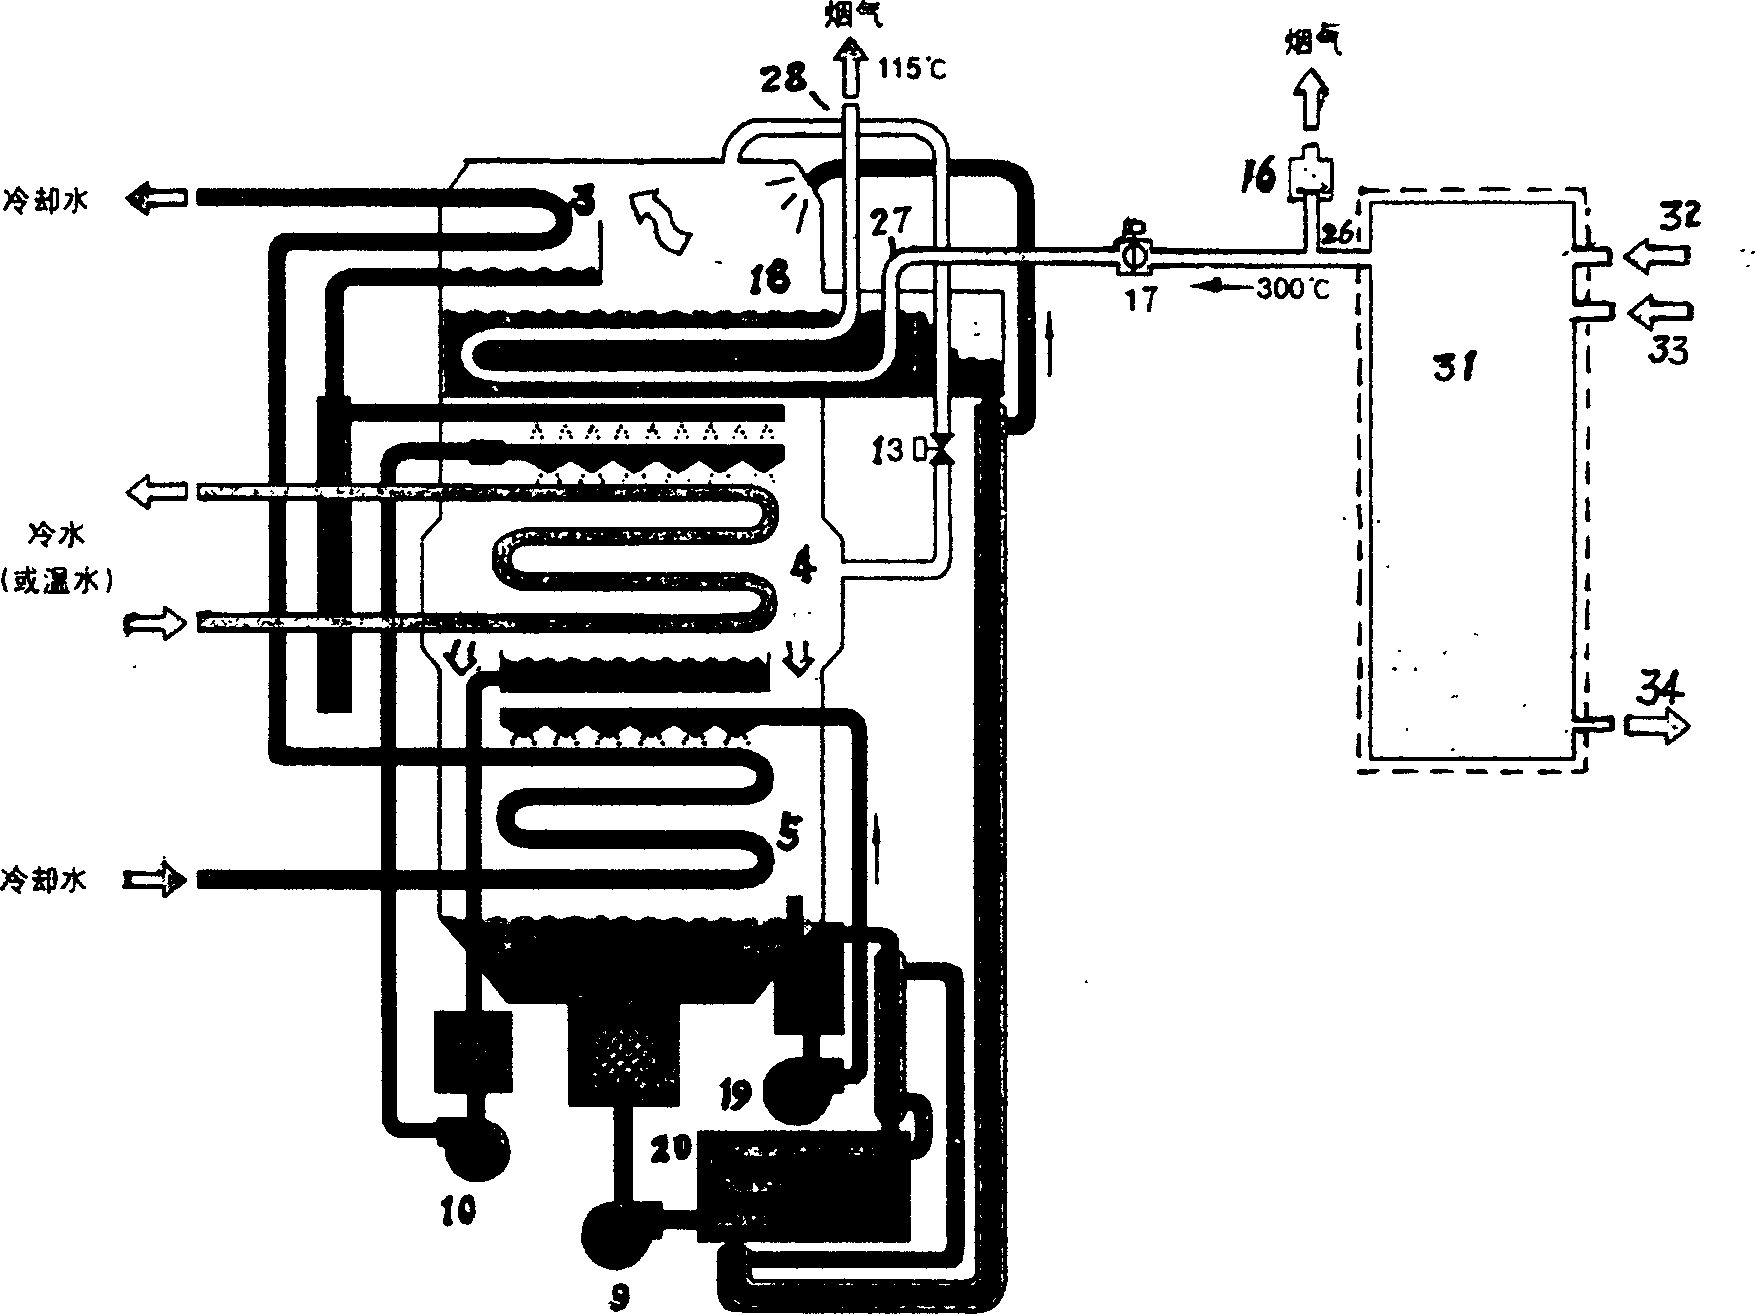 Apparatus for refrigeration or pyrogenicity or sanitary hot water using generator exhaust or residual heat